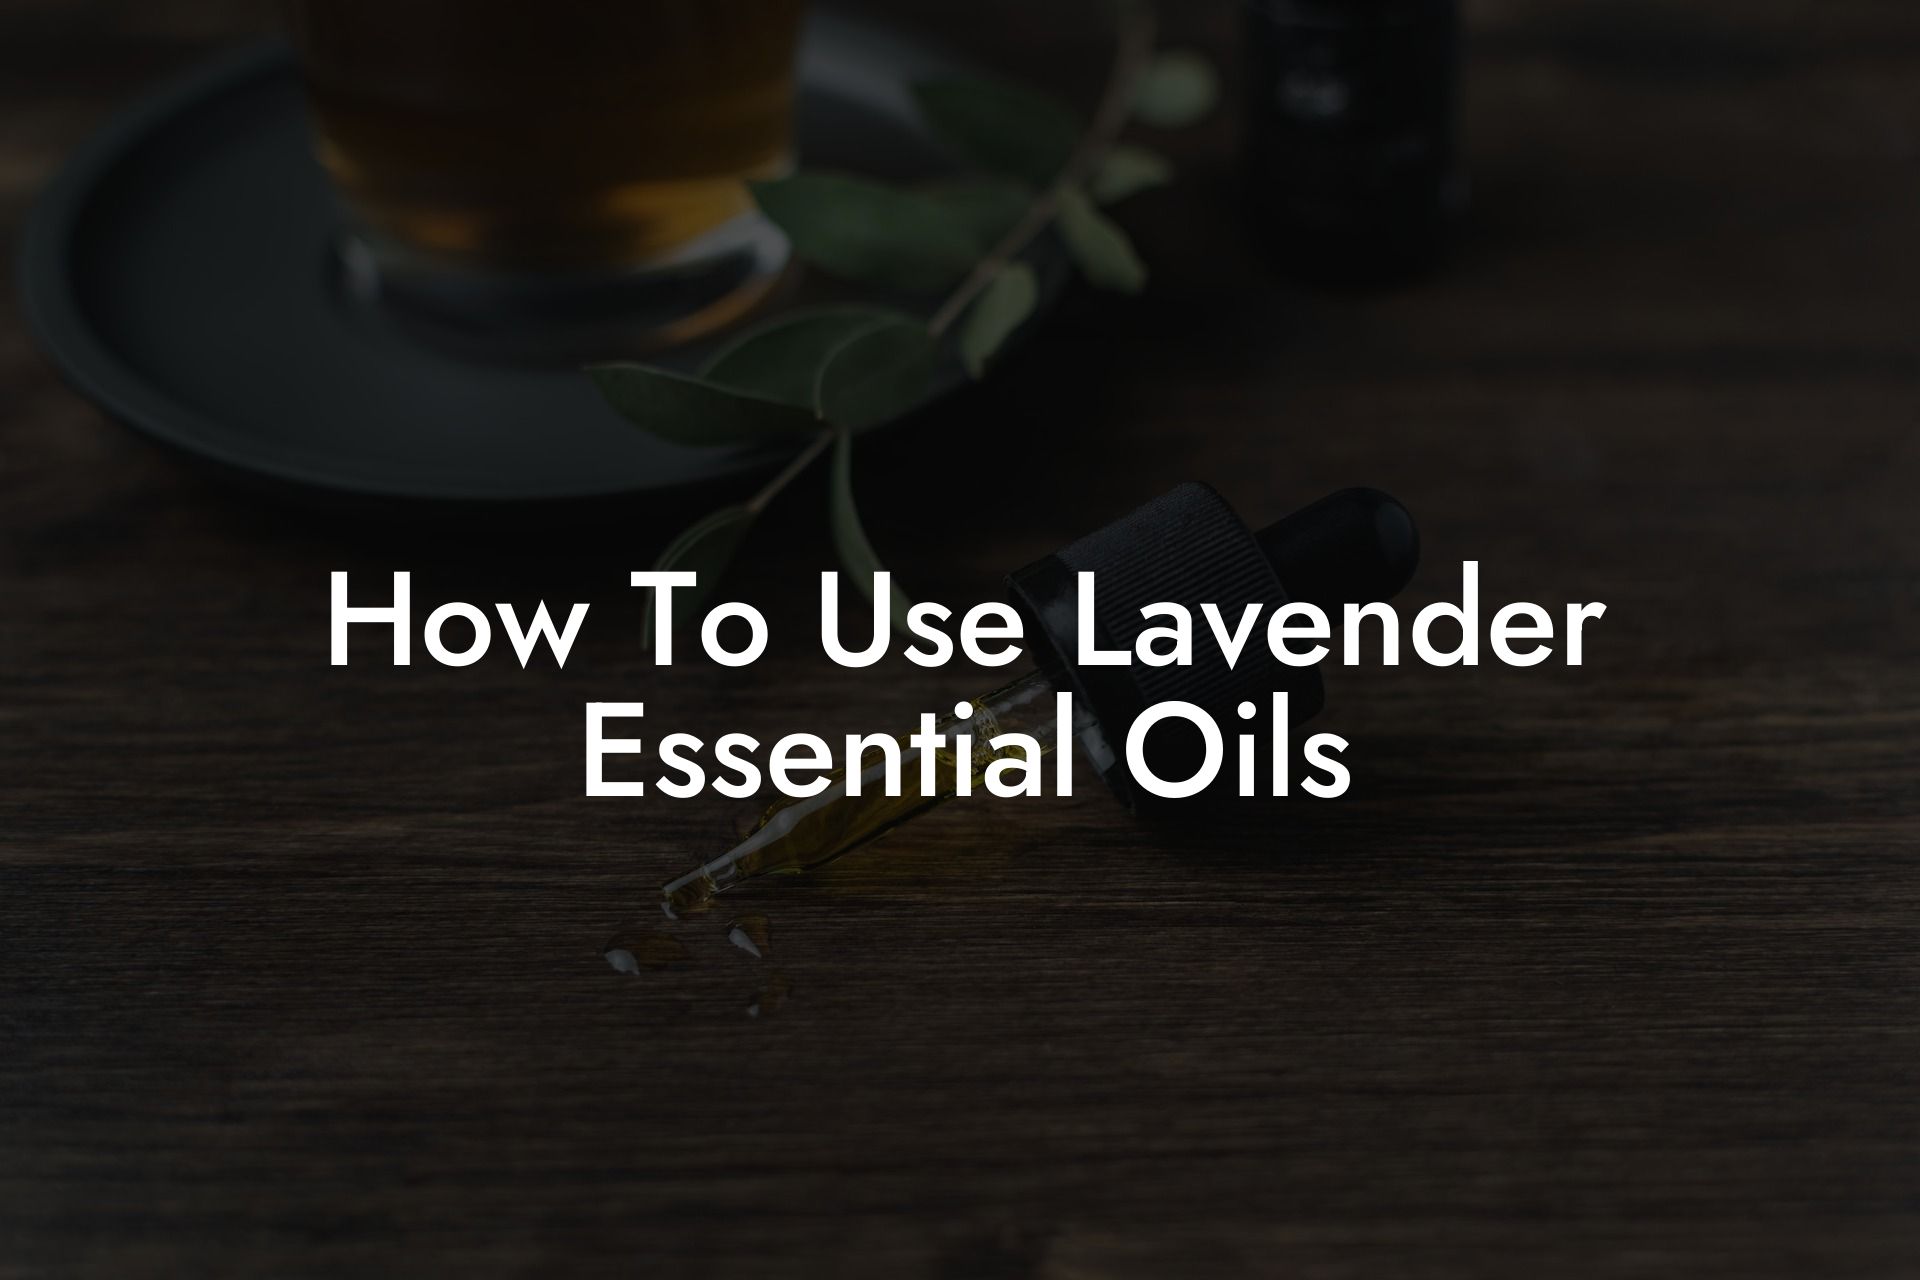 How To Use Lavender Essential Oils